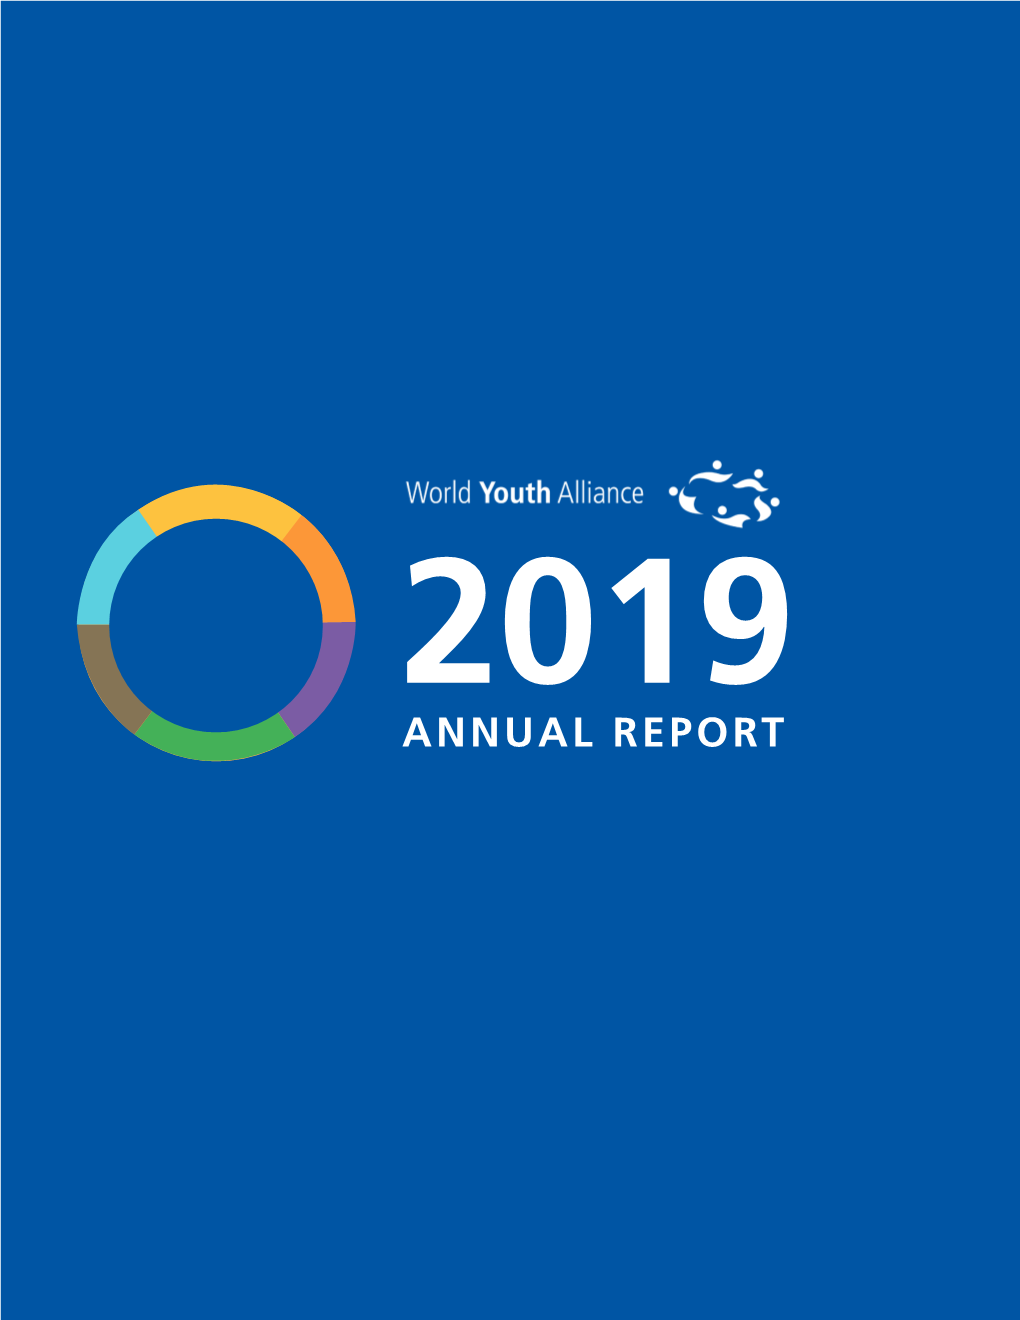 2019 Annual Report Table of Contents